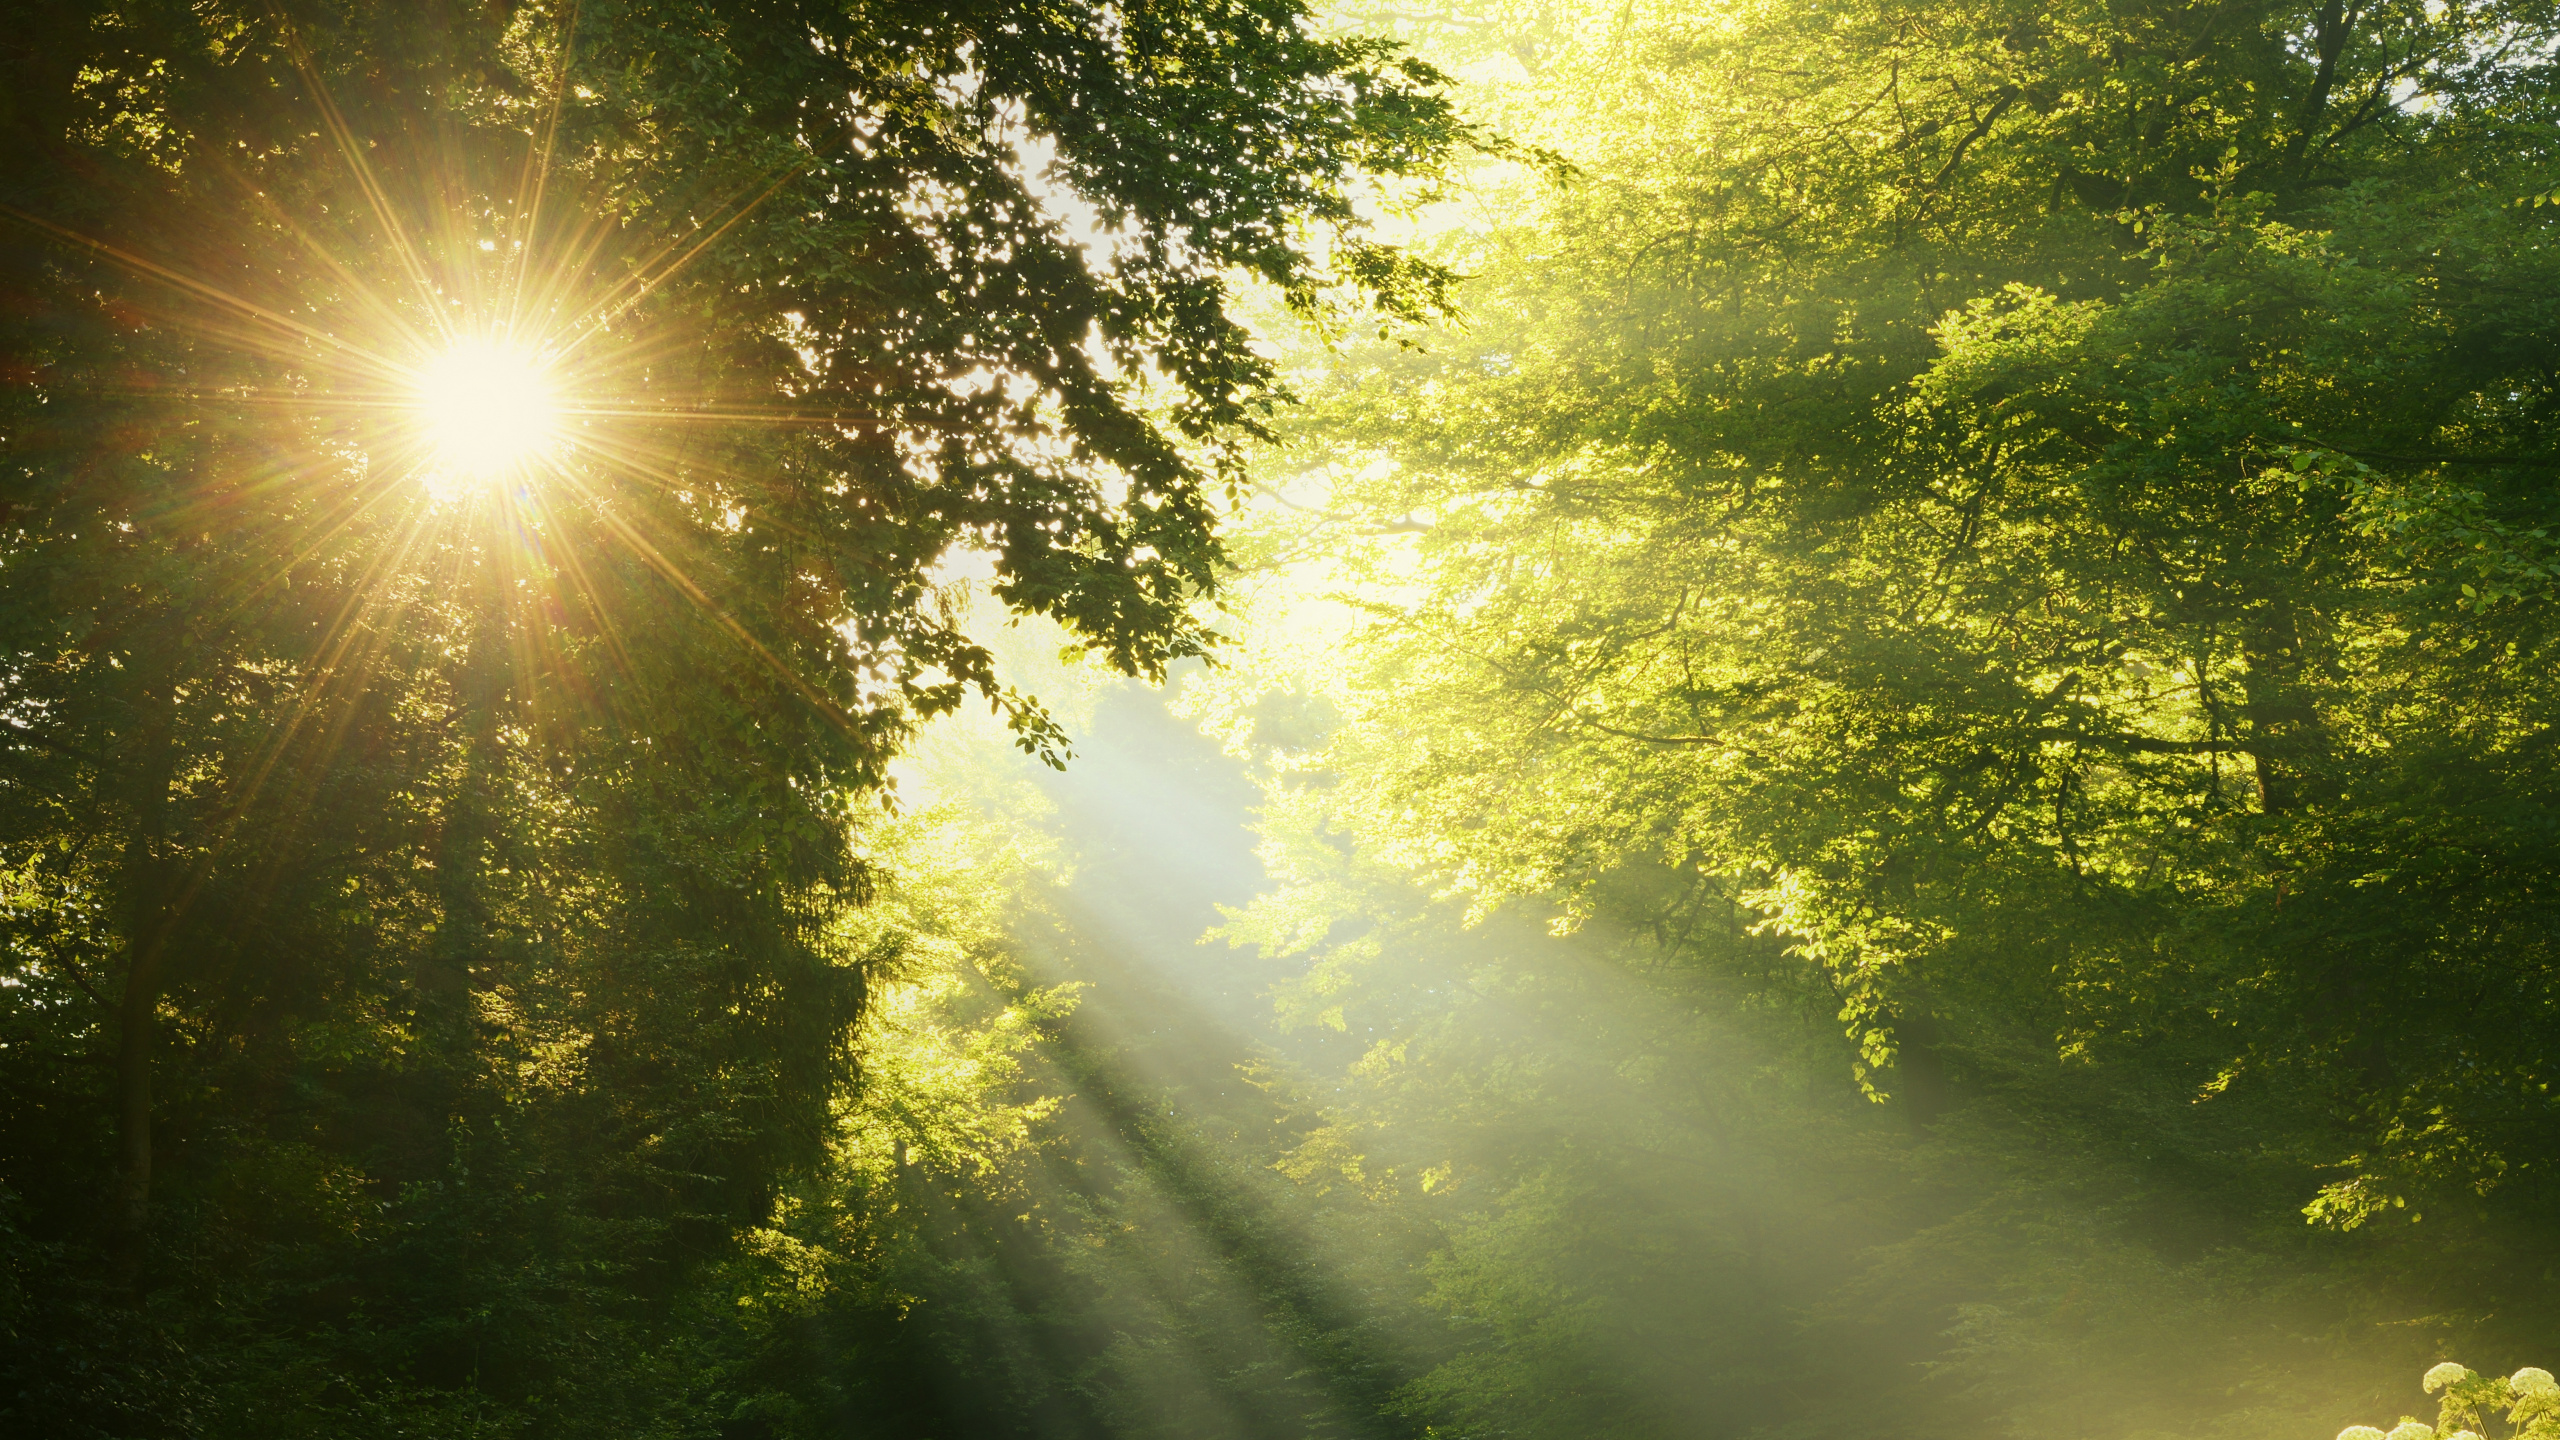 Sun Rays Coming Through Green Trees. Wallpaper in 2560x1440 Resolution